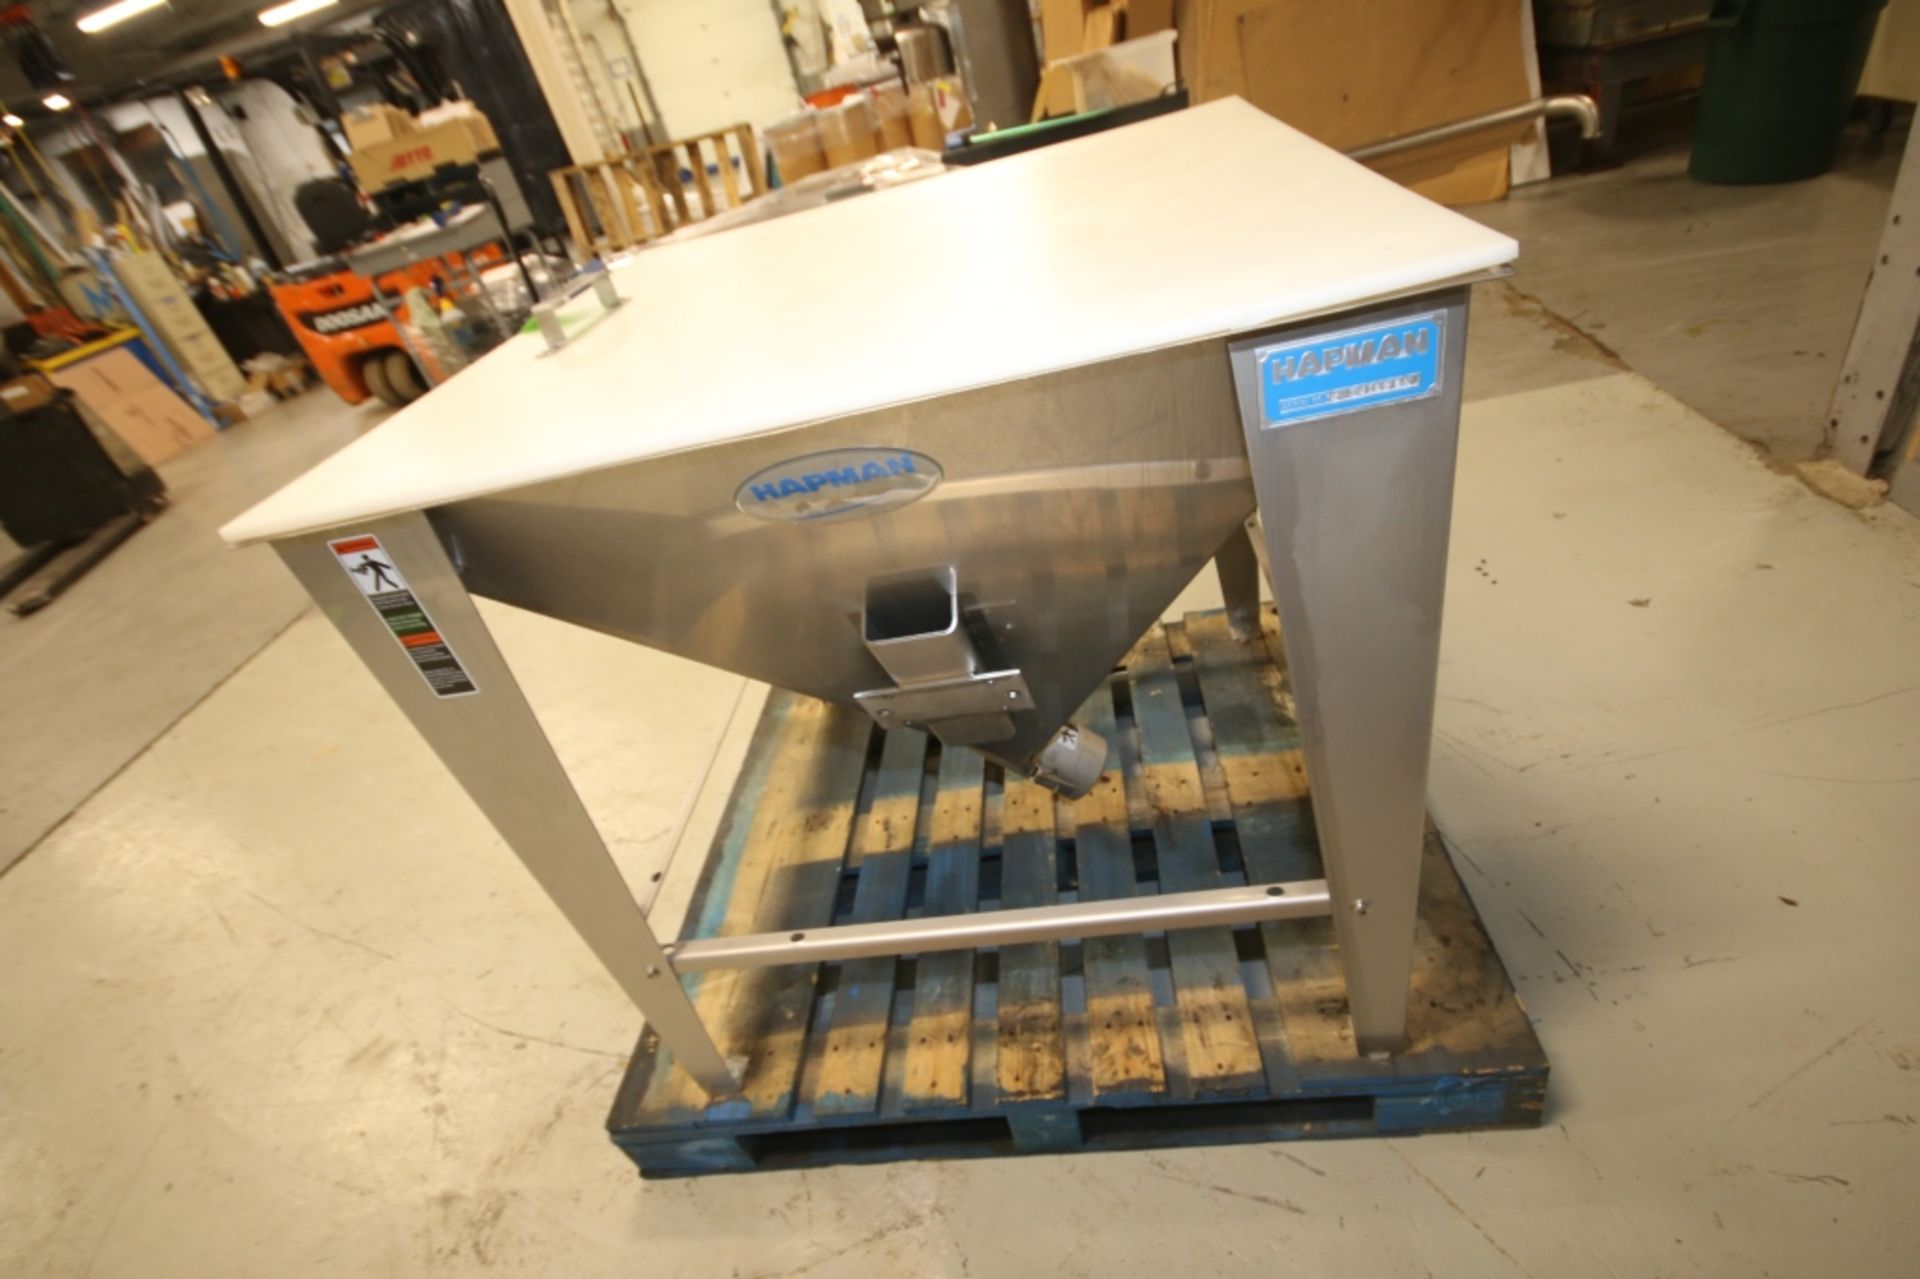 Hapman Powder Auger Conveyor System, Includes38" W x 38" L x 36" H S/S Hopper SN X 14107 BA, with - Image 5 of 10